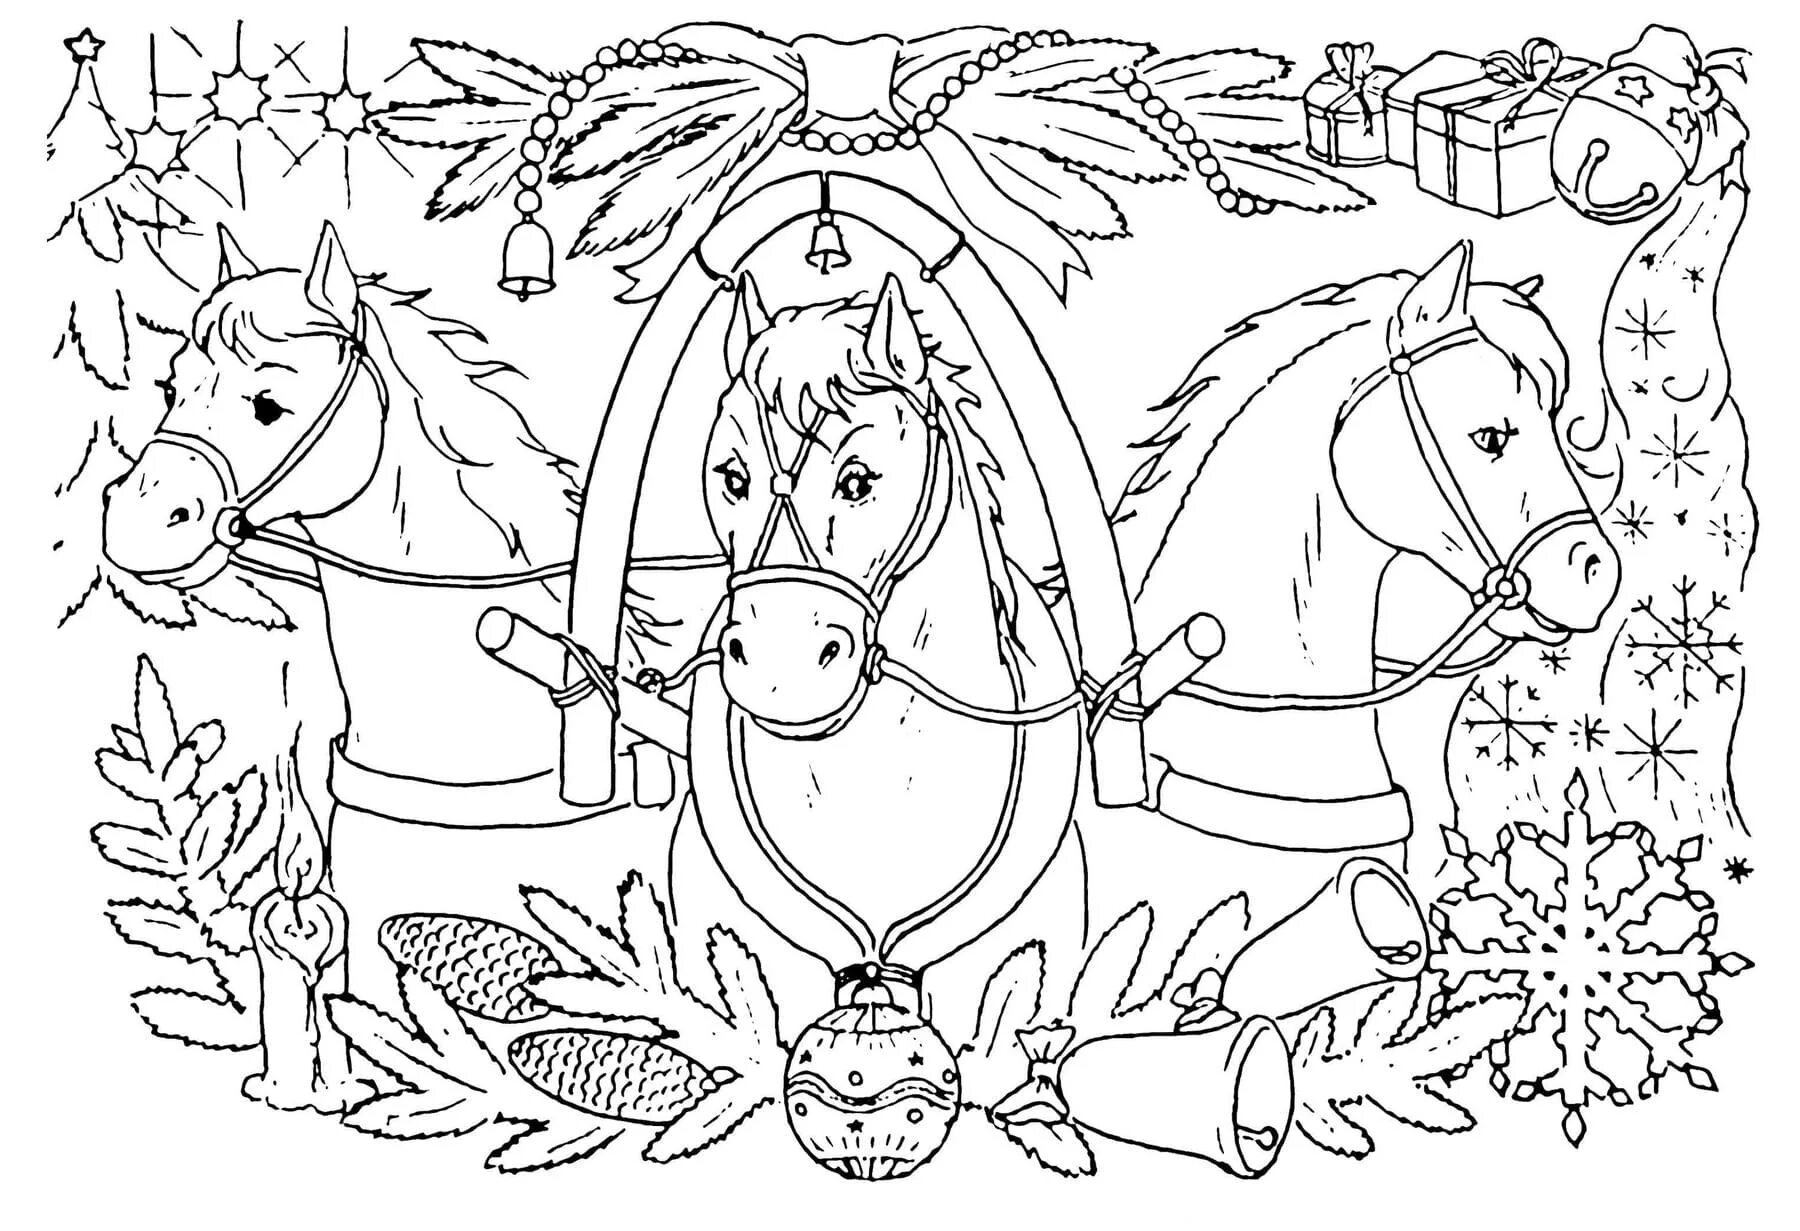 Coloring page of a fascinating trio of horses